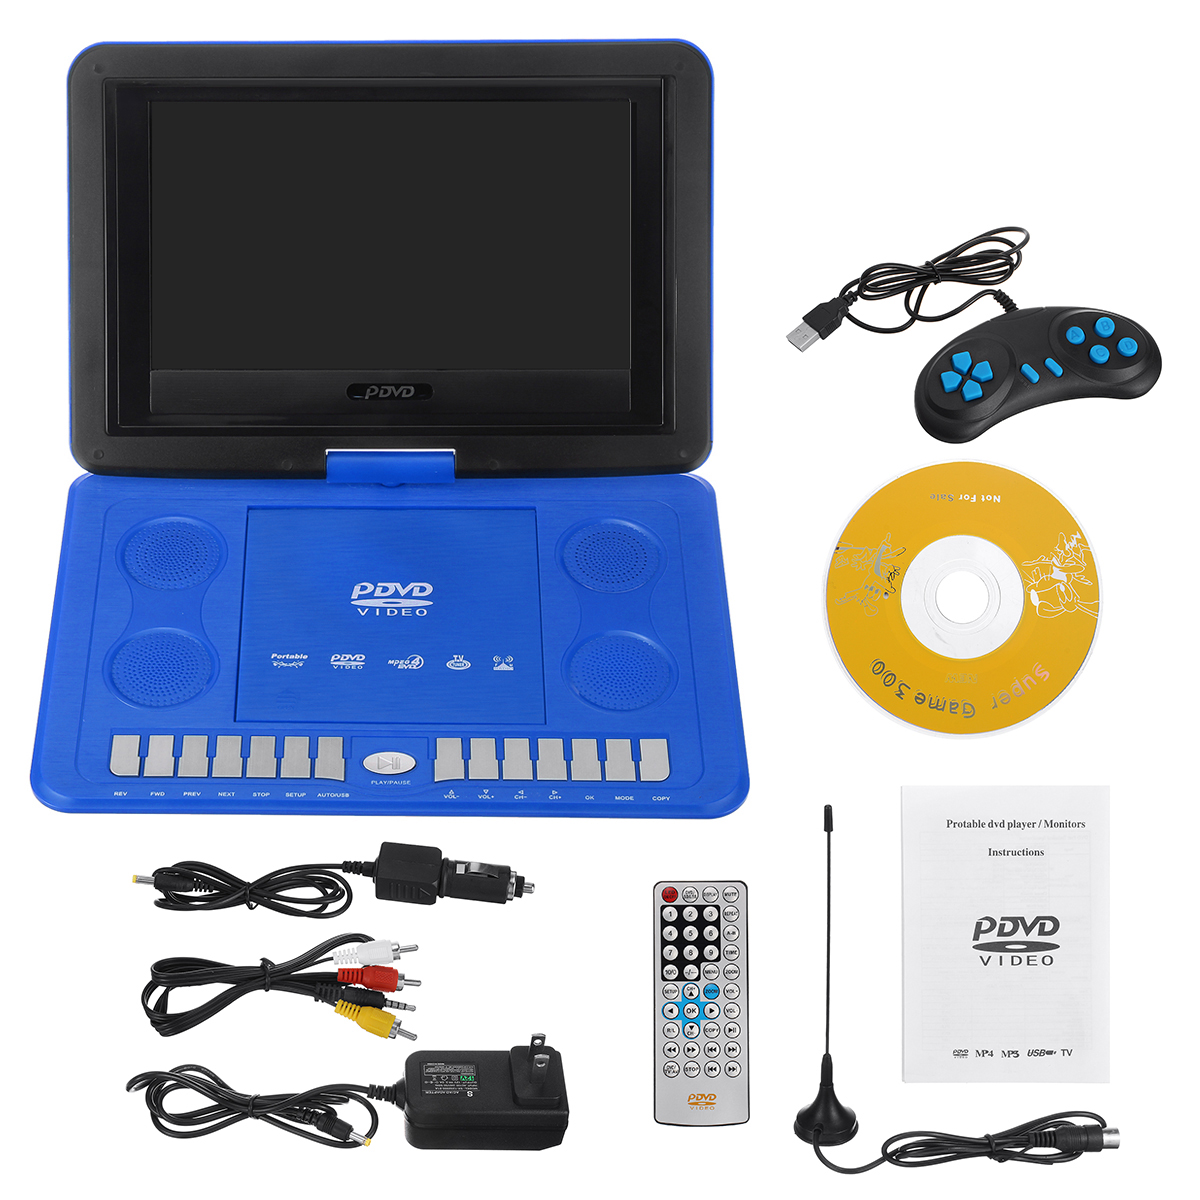 138-Inch-Portable-Television-DVD-VCD-EVD-CD-Player-EVD-TV-USB-Game-270deg-Rotation-LCD-Screen-with-R-1934262-15